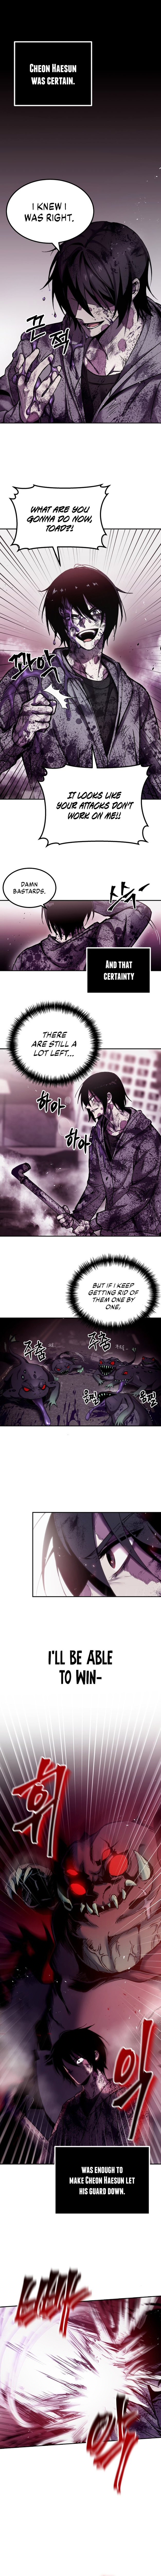 Poison Eating Healer Chapter 2 Page 9